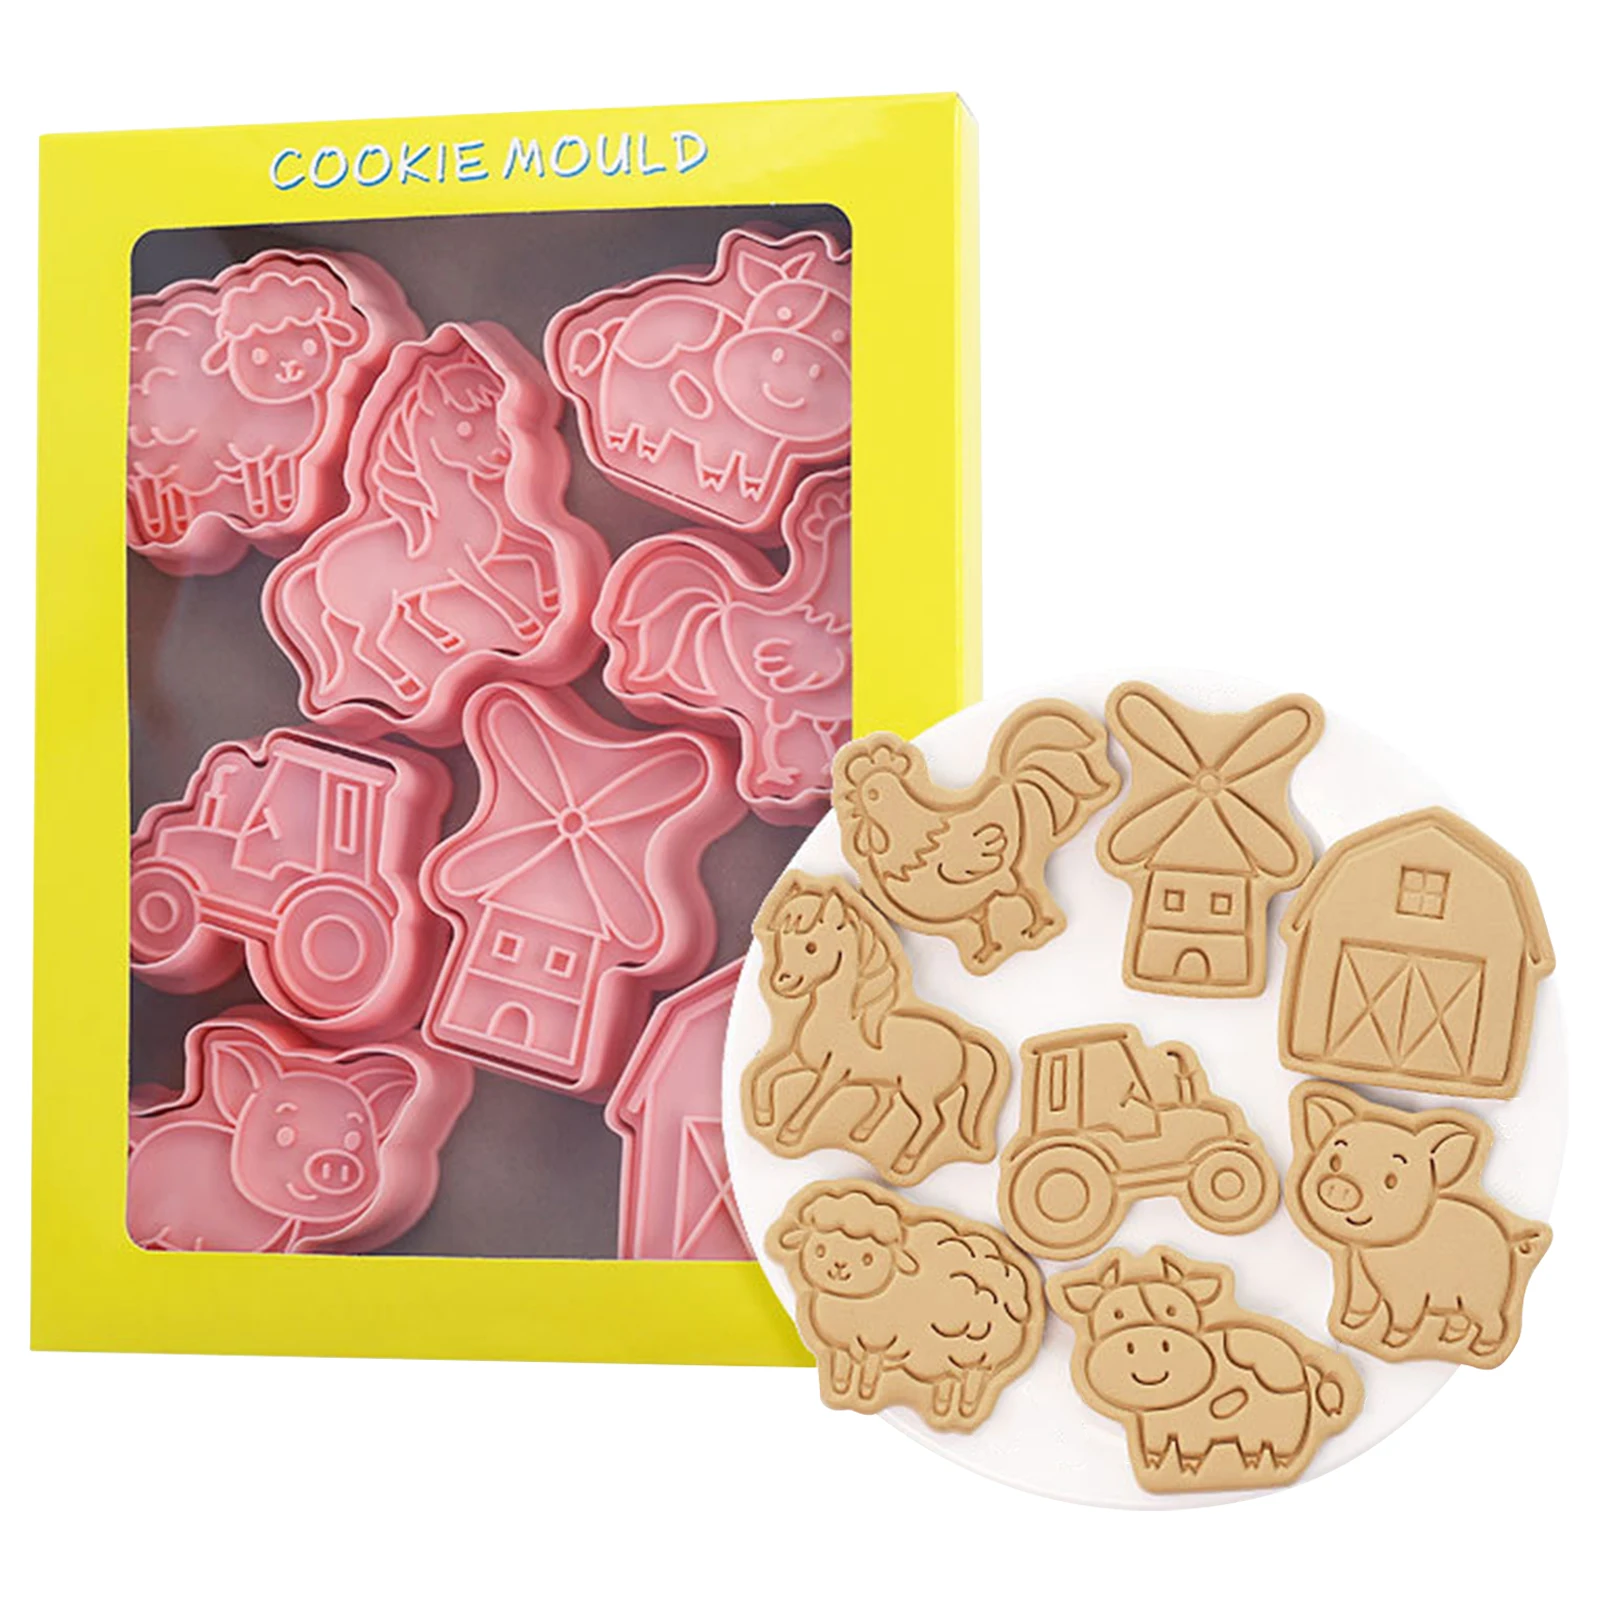 

Cookie Cutter Stamps Farmhouse Pattern Biscuit Cutter Molds 8pcs Funny Cartoon Cookie Stamps Embossing Cutters For Biscuit